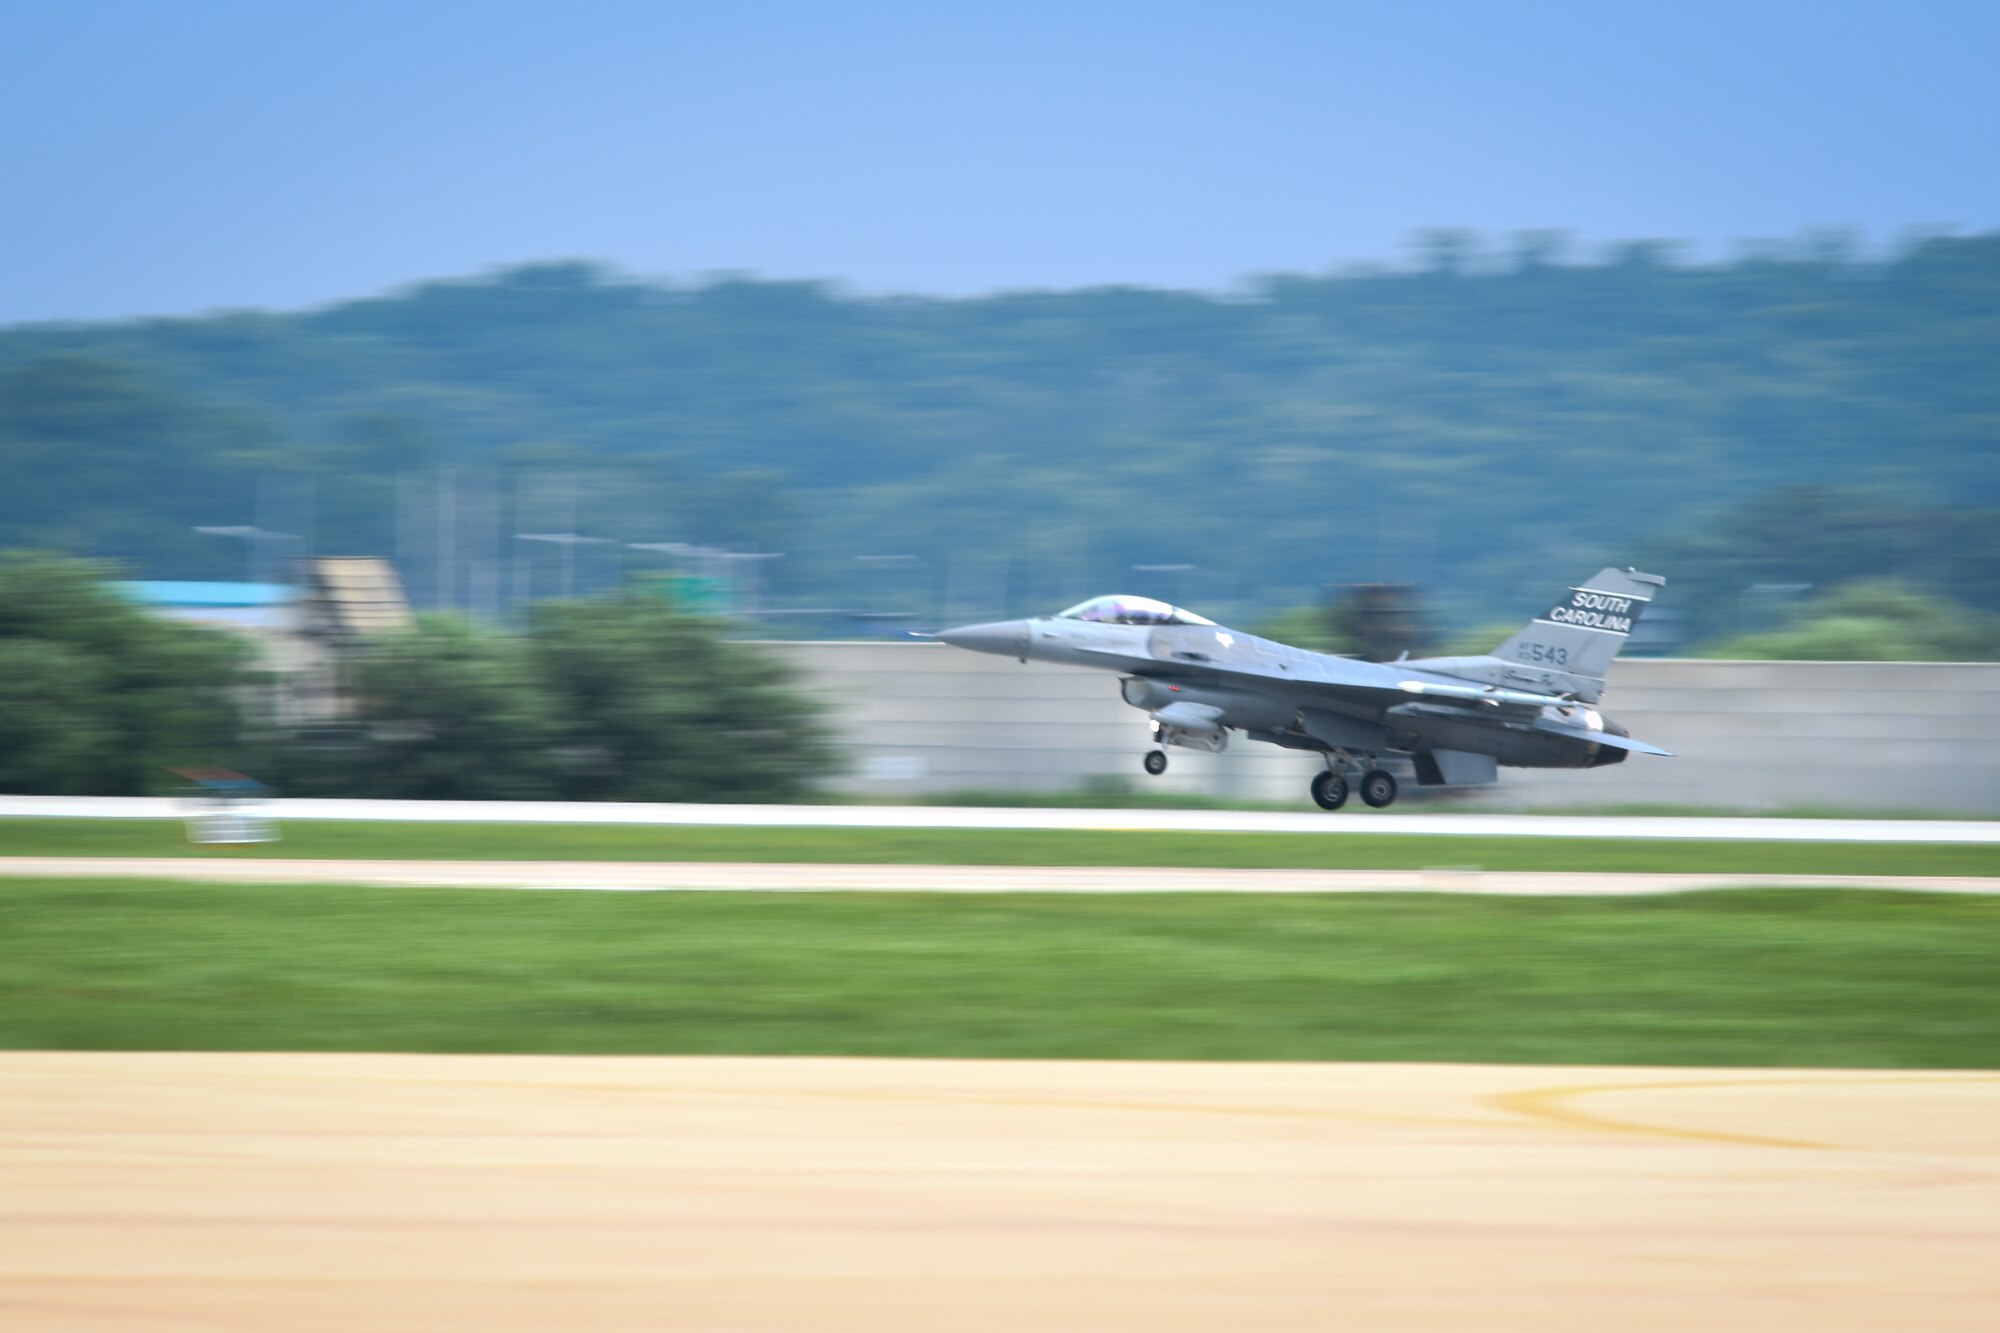 An F-16 Fighting Falcon from the South Carolina Air National Guard’s 157th Expeditionary Fighter Squadron takes off from the flightline July 27, 2016, at Osan Air Base, Republic of Korea. Approximately 300 Airmen and 12 F-16s from the 169th Fighter Wing deployed to Osan in support of the U.S. Pacific Command Theater Security Package. (U.S. Air Force photo by Senior Airman Dillian Bamman/Released)